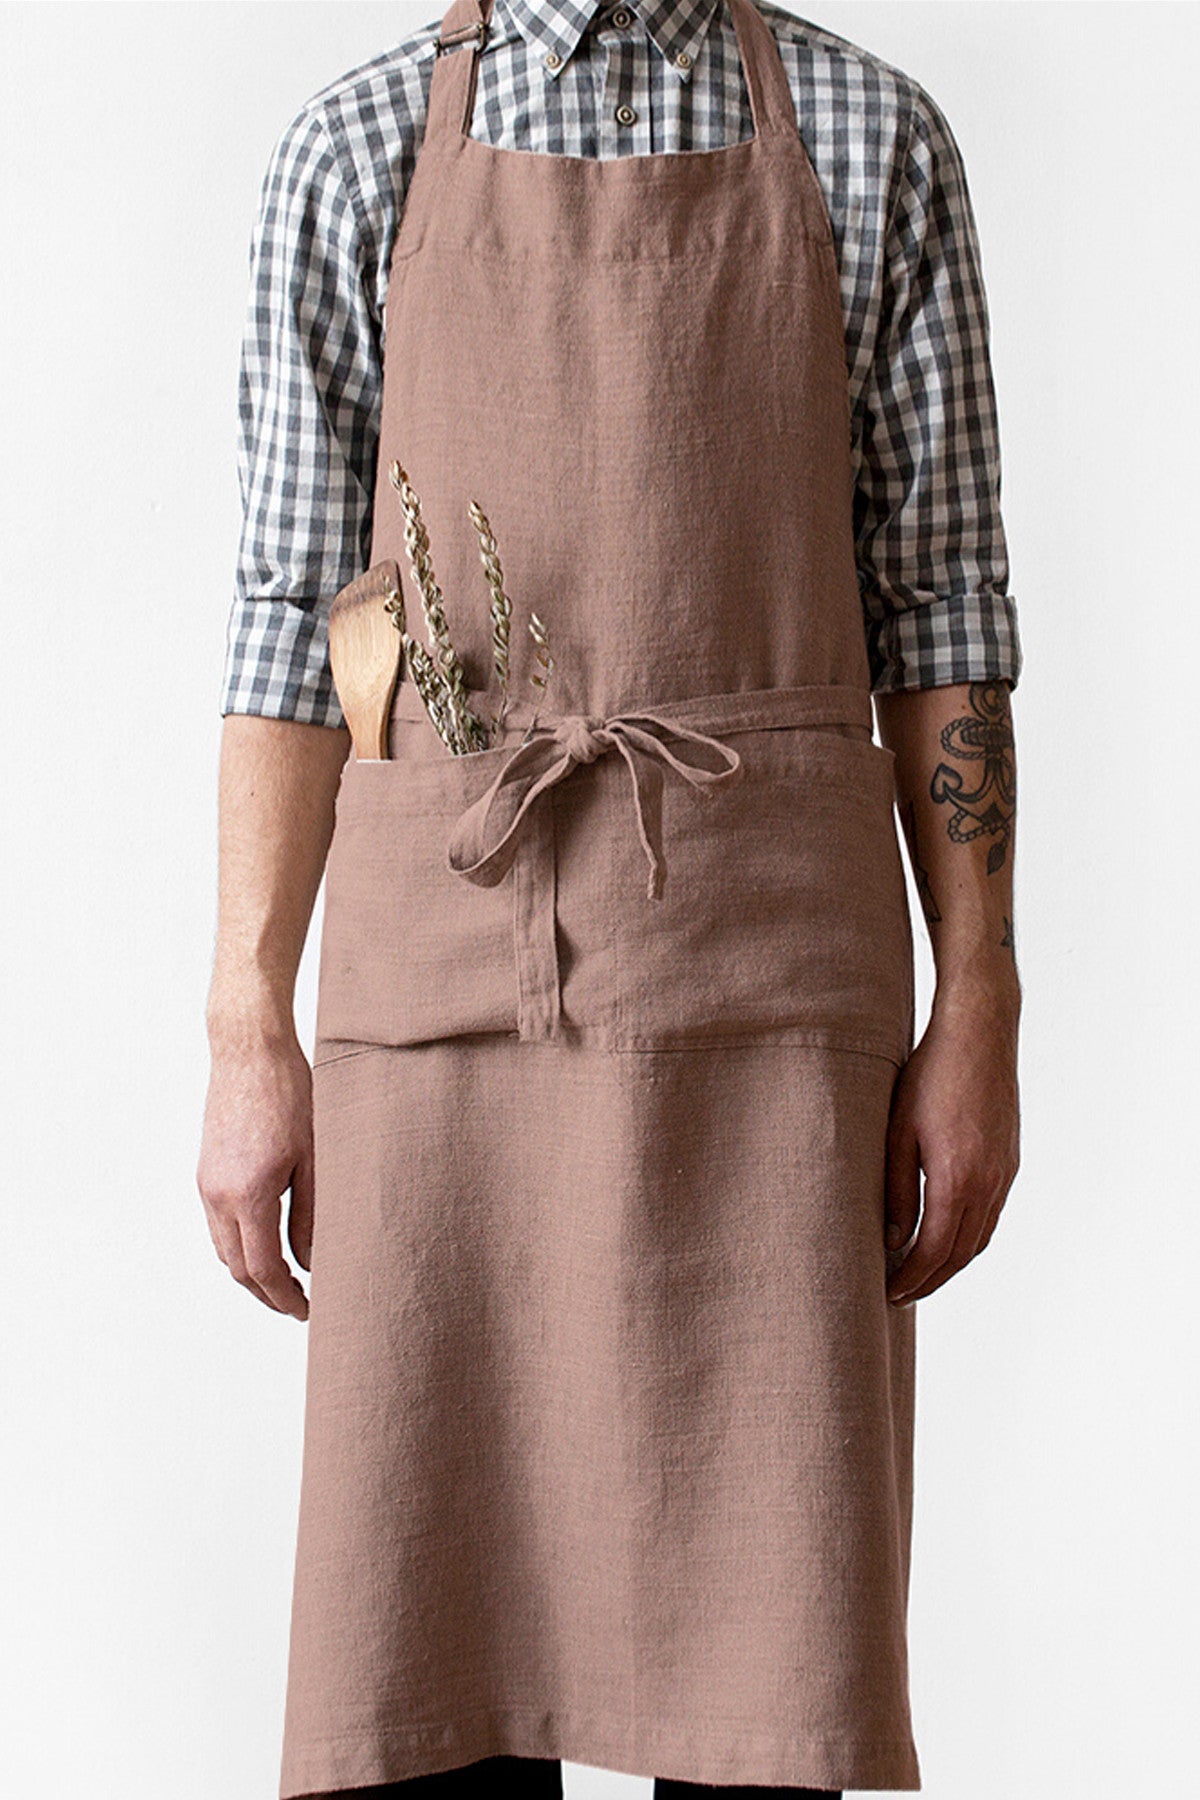 CHEF APRON, Ashes of Roses